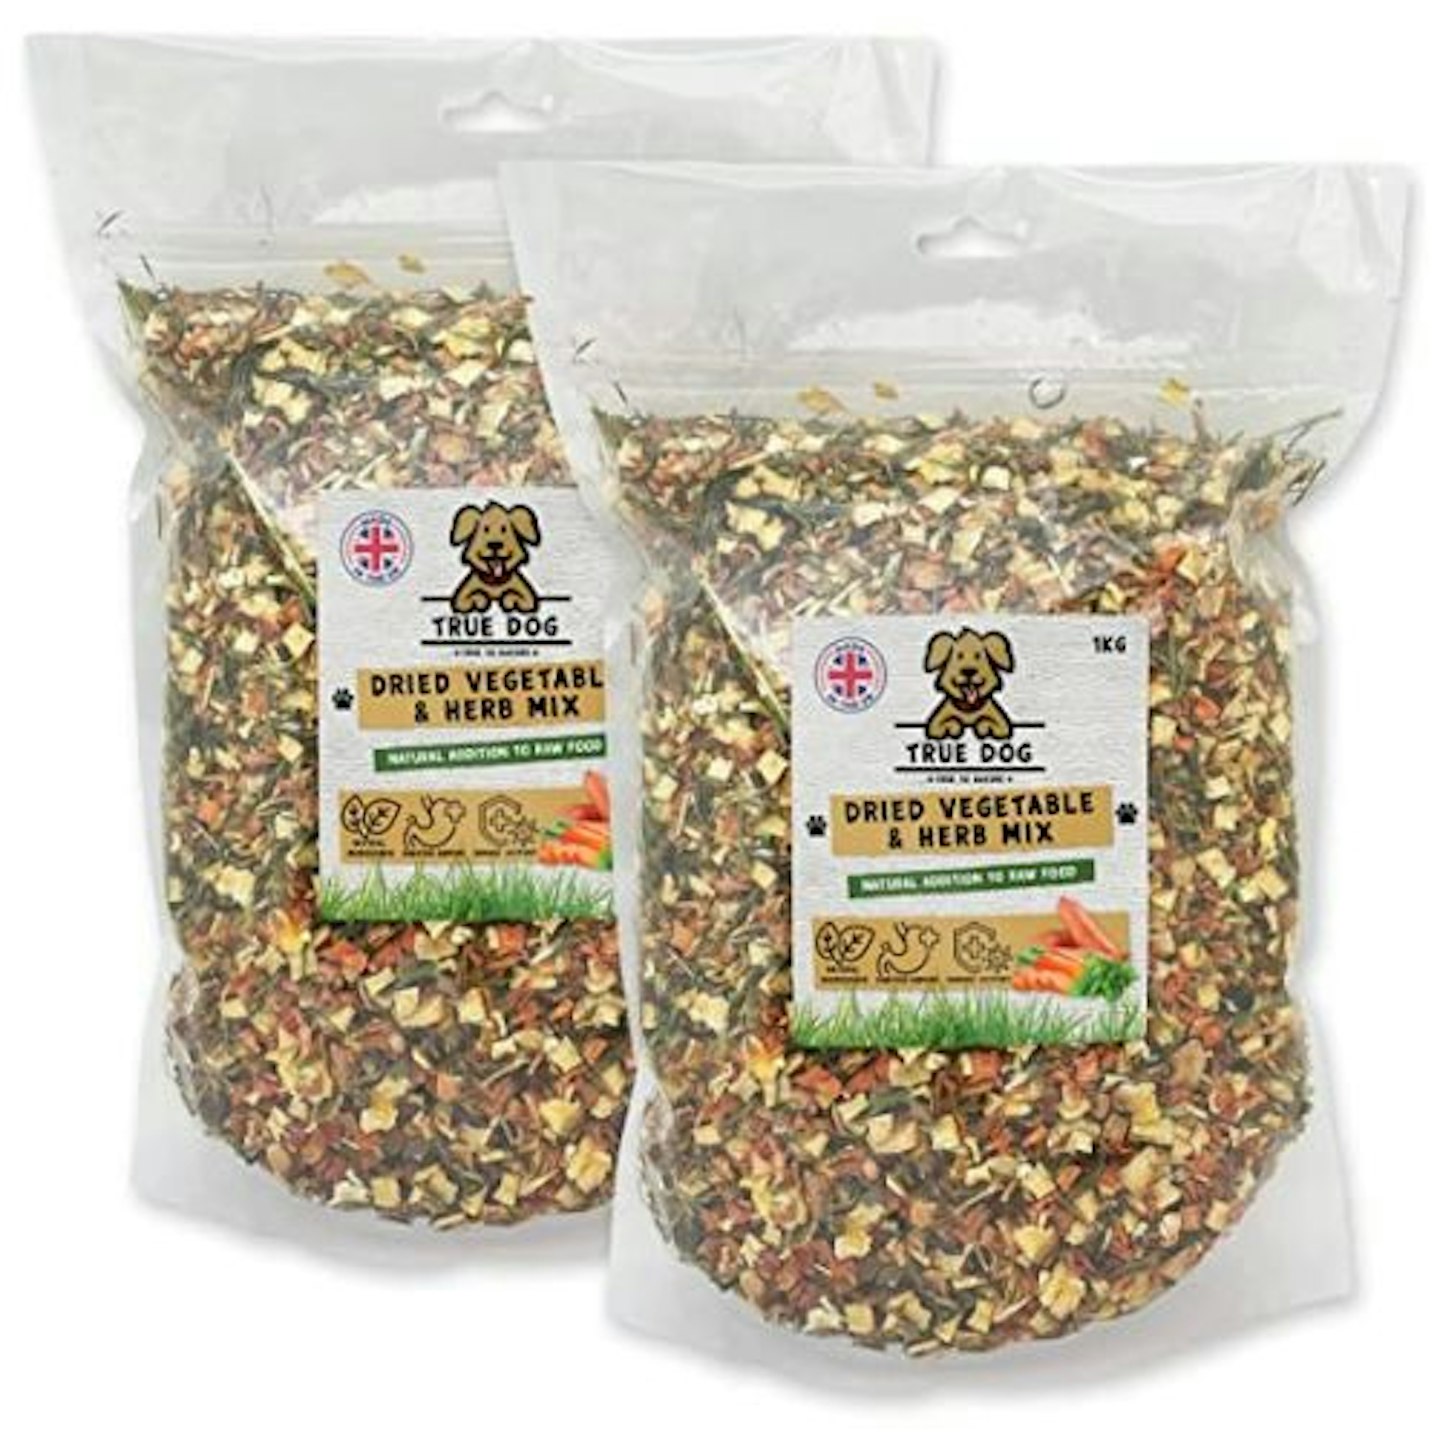 True Dog Dried Vegetable and Herb Mix for Dogs